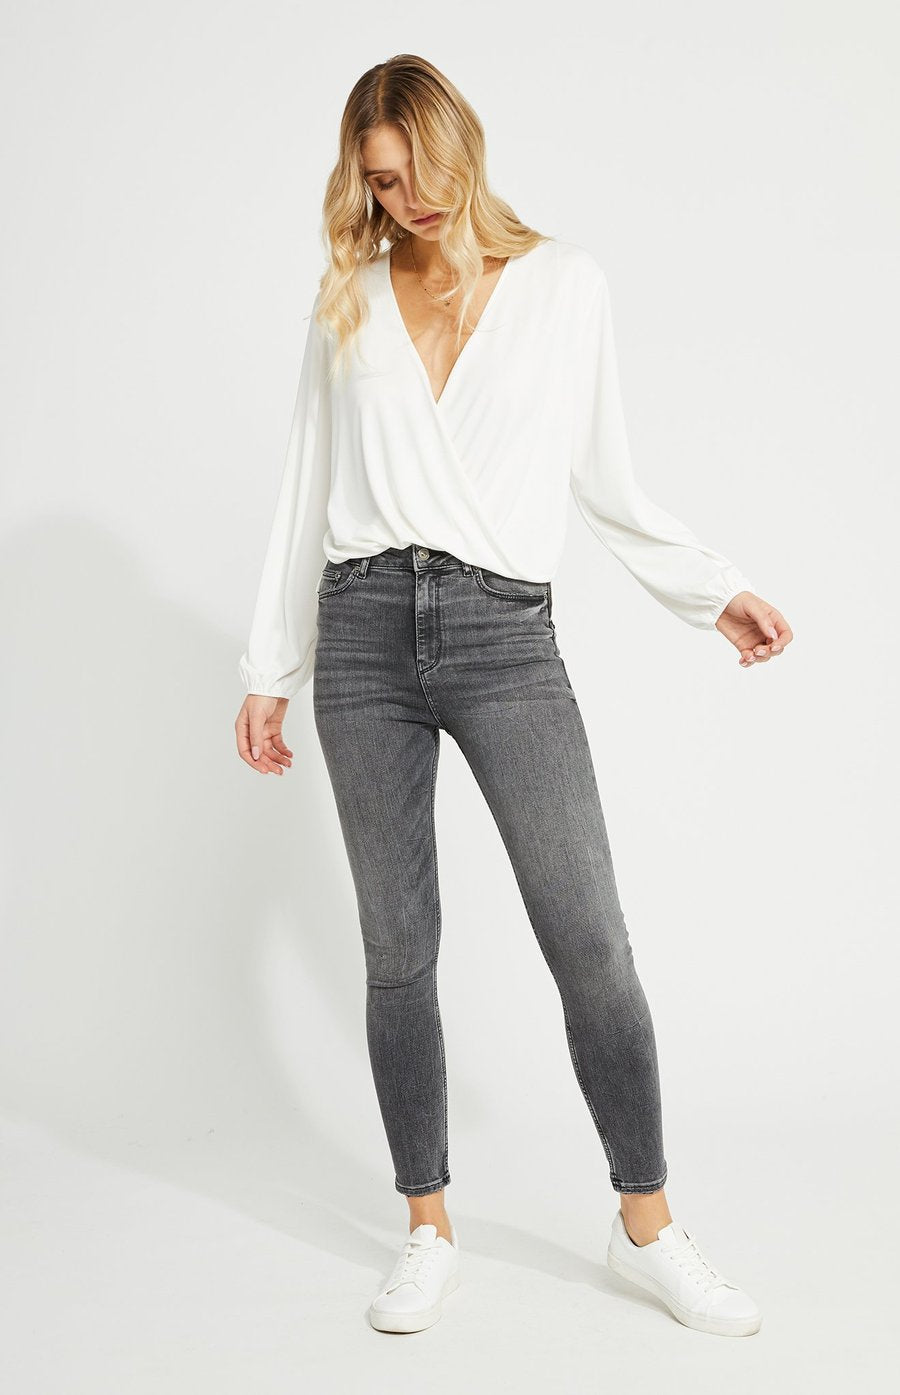 "Leah" Top in White by Gentle Fawn